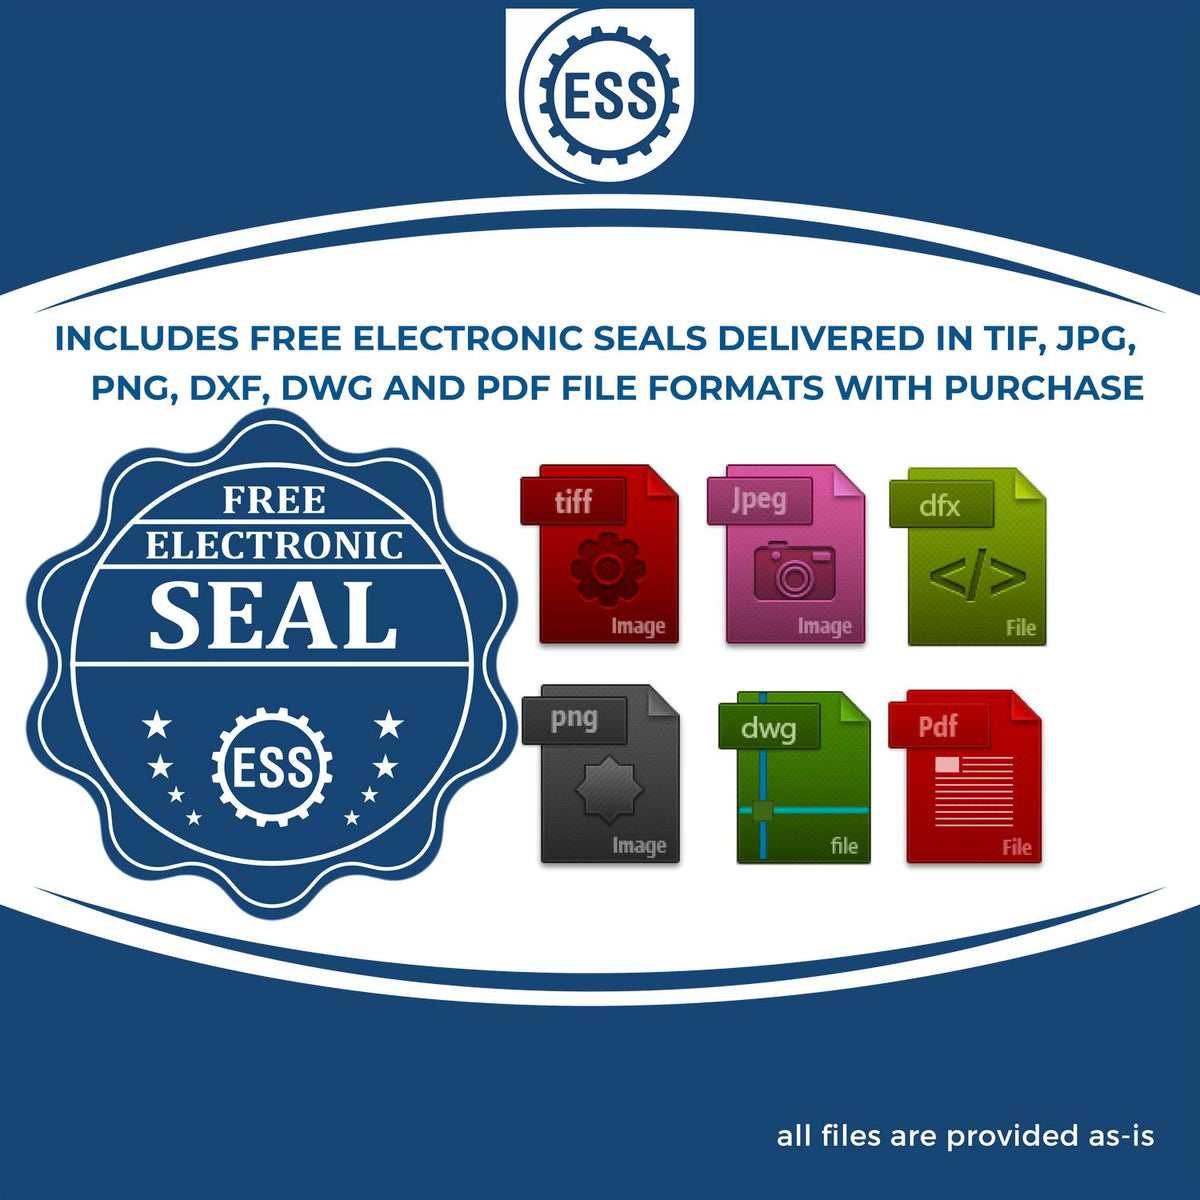 An infographic for the free electronic seal for the Gift South Carolina Geologist Seal illustrating the different file type icons such as DXF, DWG, TIF, JPG and PNG.